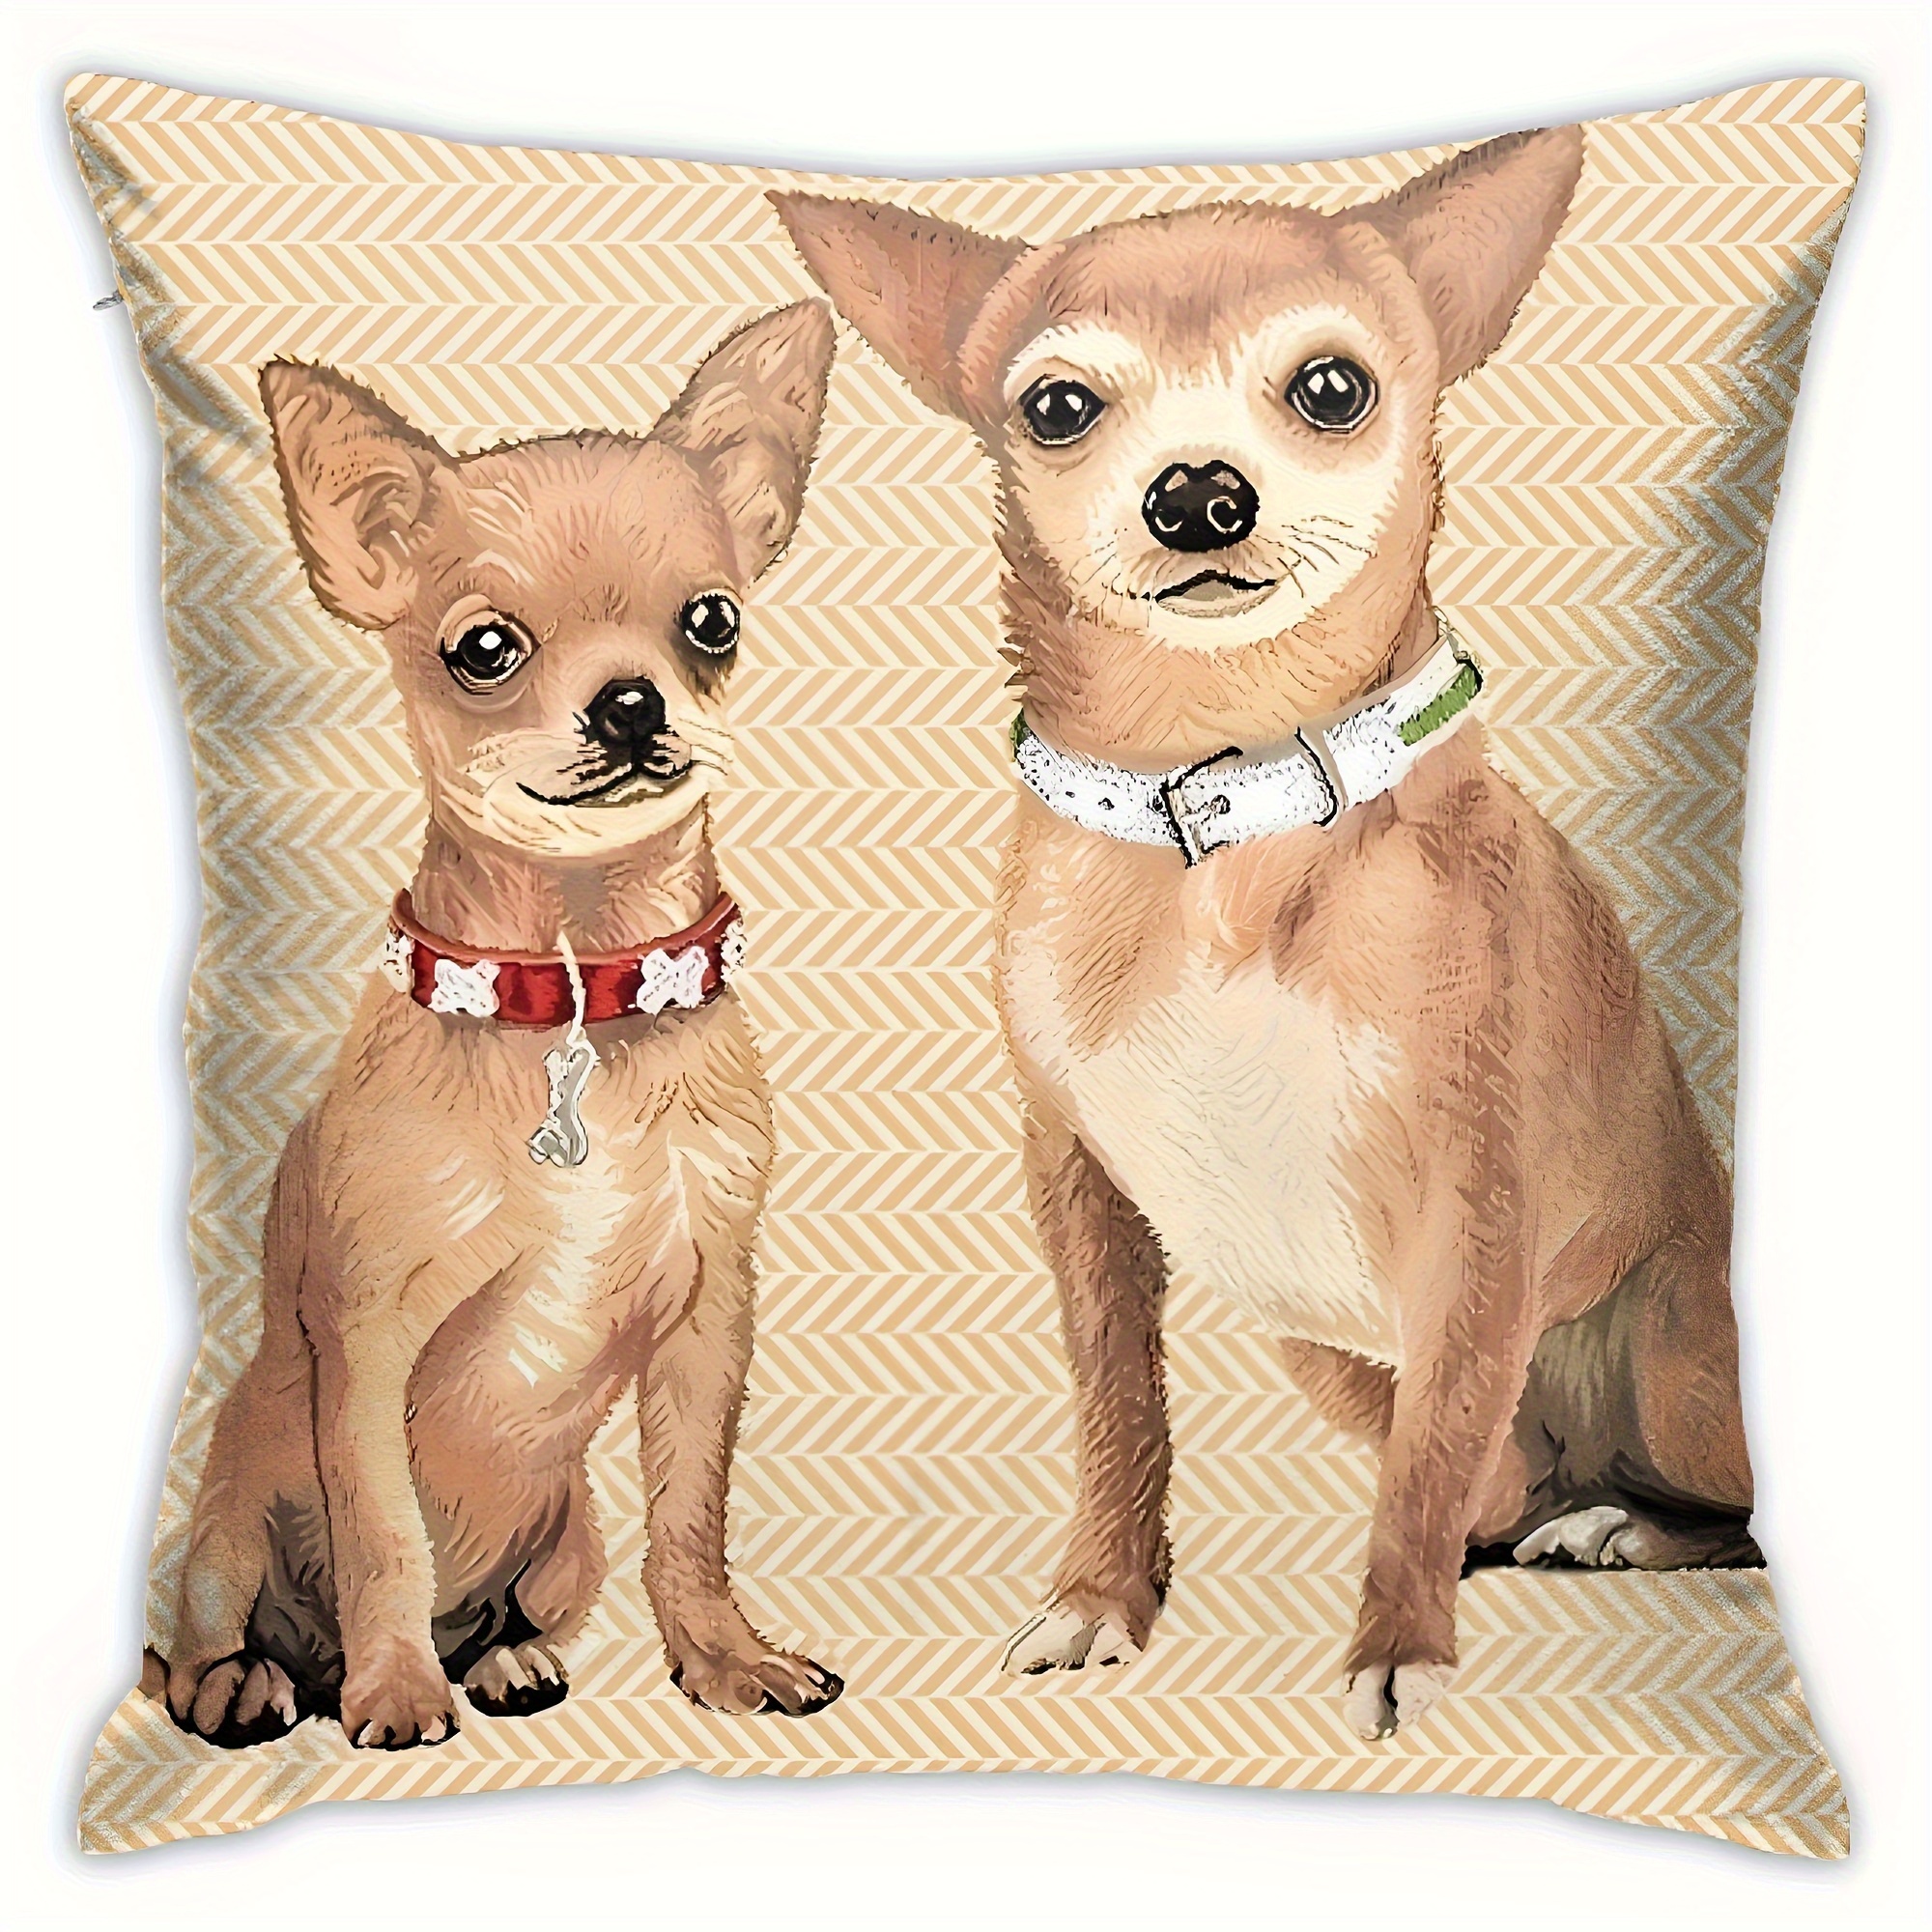 

Farmhouse Chihuahua Dog Plush Pillow Cover, Decorative Pet Animal Throw Cushion Case For Sofa, Bedroom, 1 Piece 18x18 Inch, Age 14+